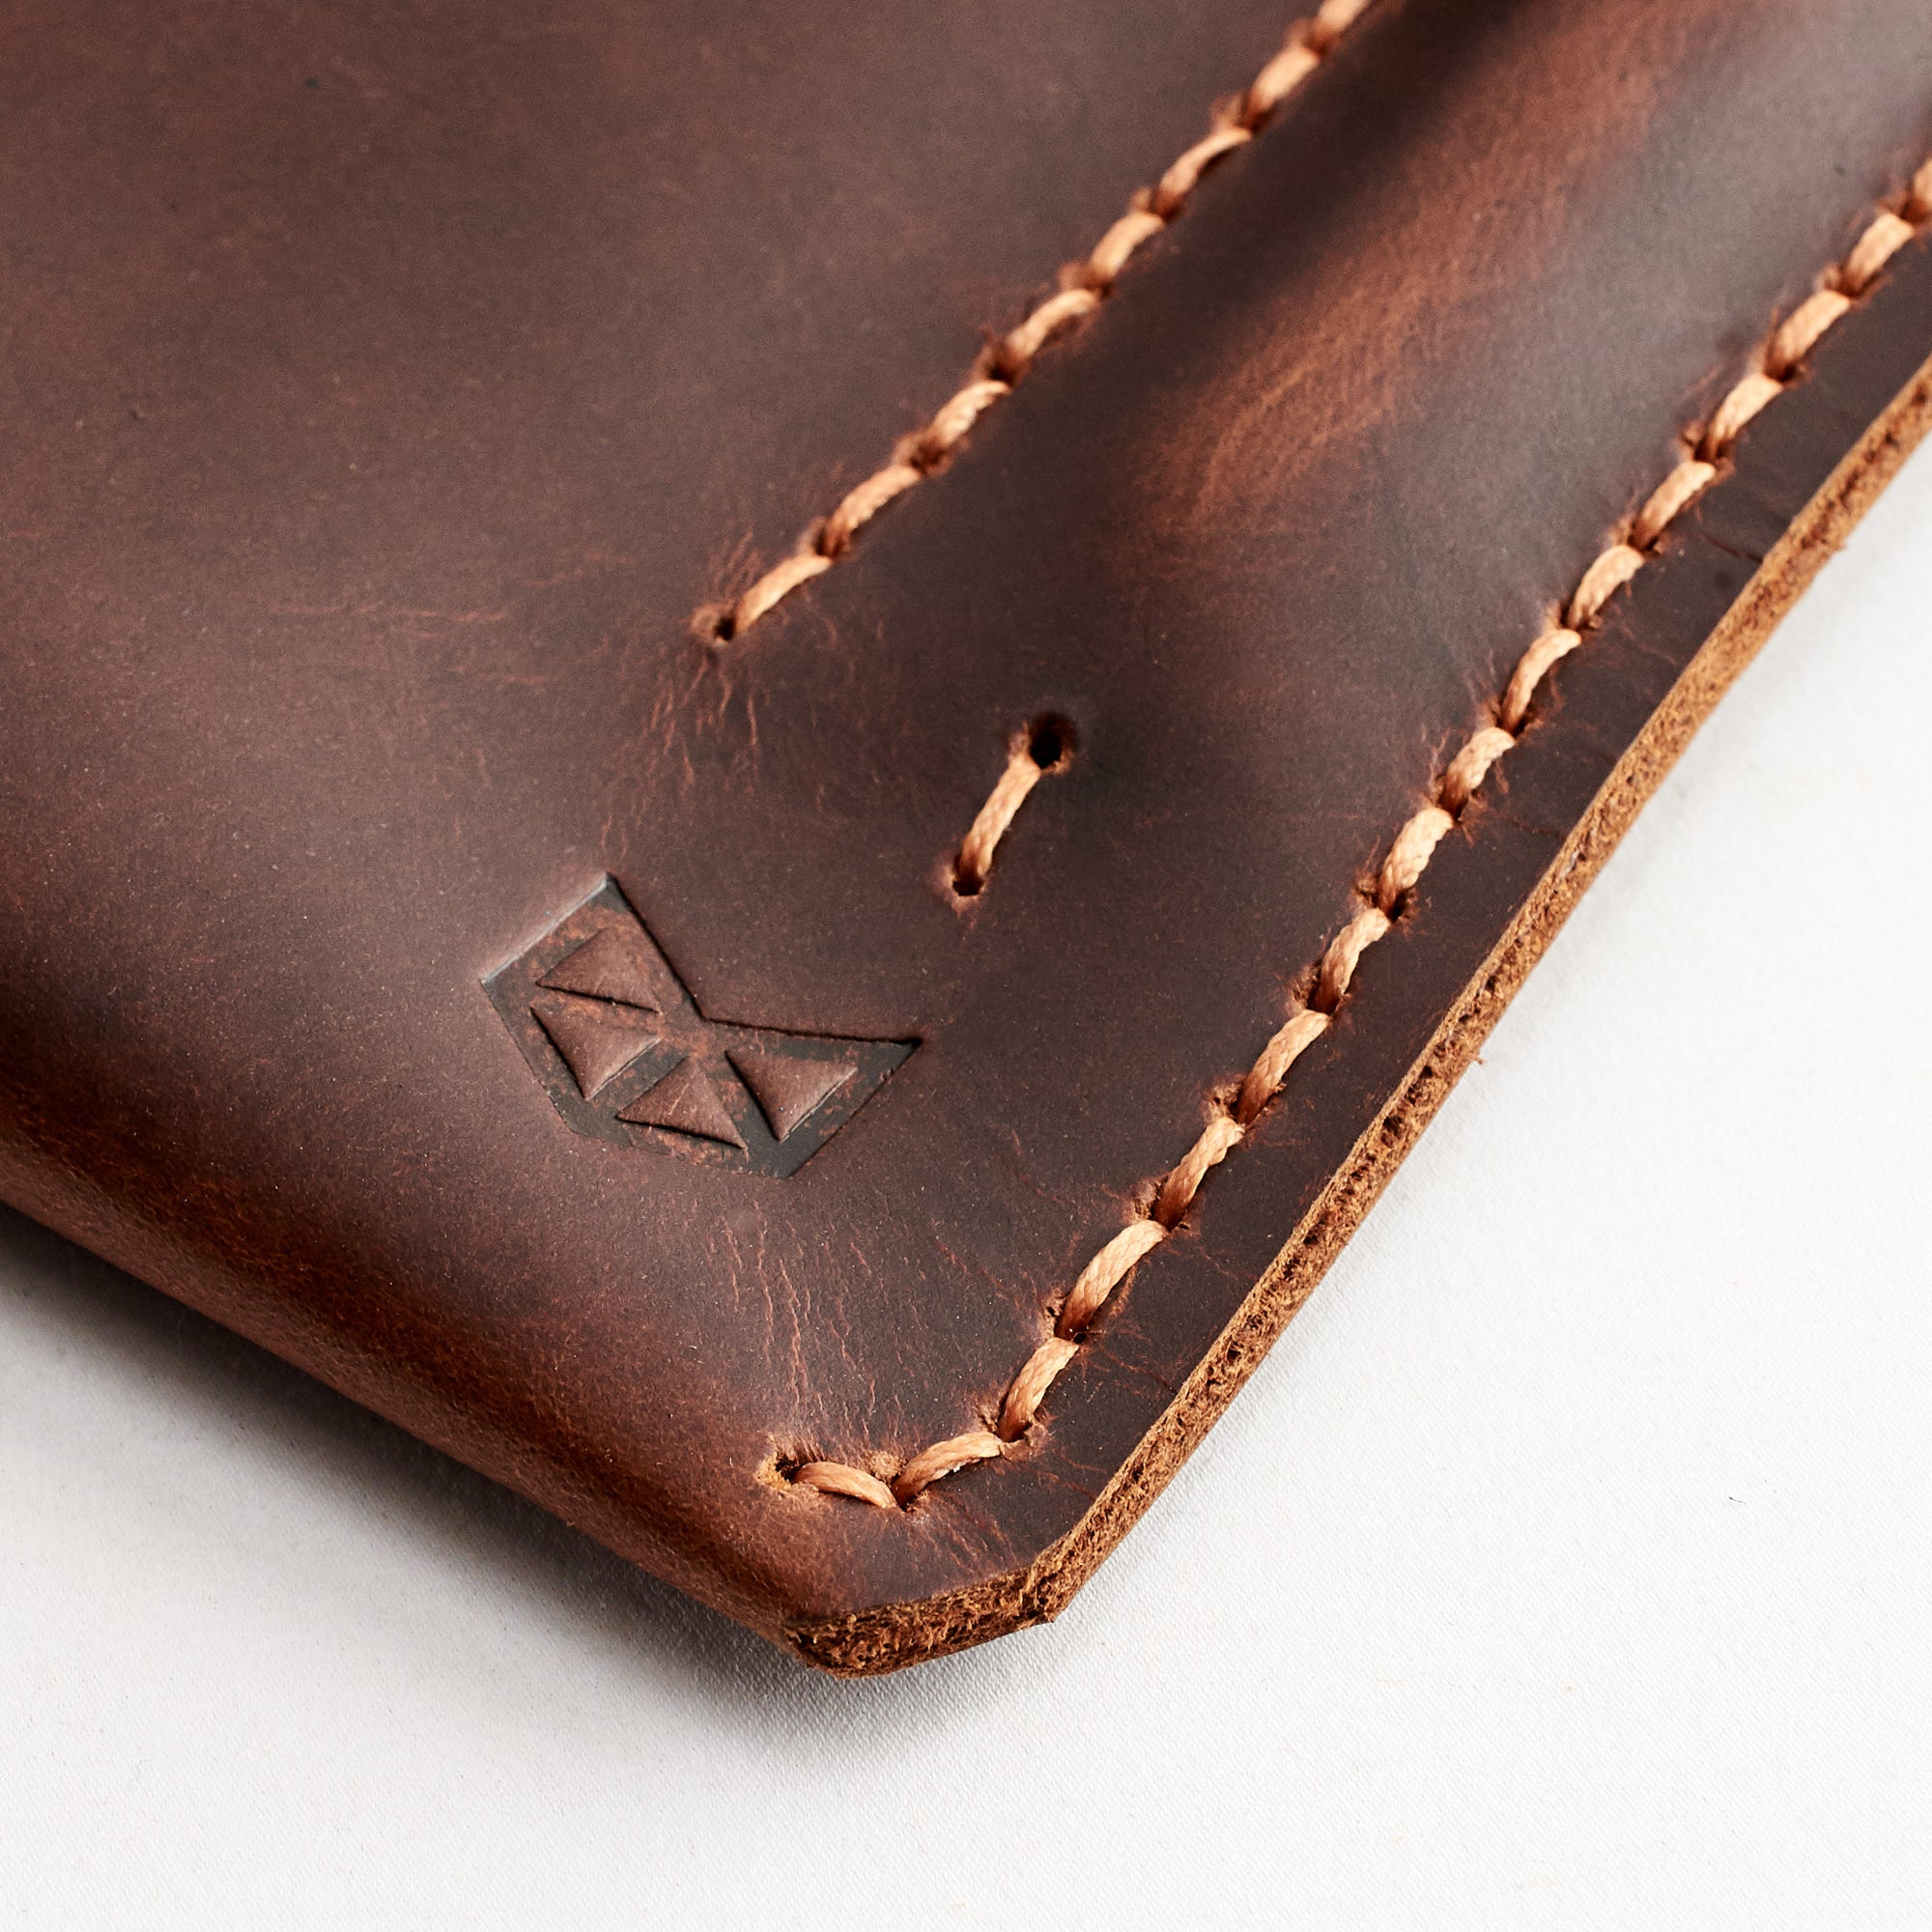 Hand stitched folio. Tan leather sleeve for ASUS Zenbook Pro Duo. Mens gifts